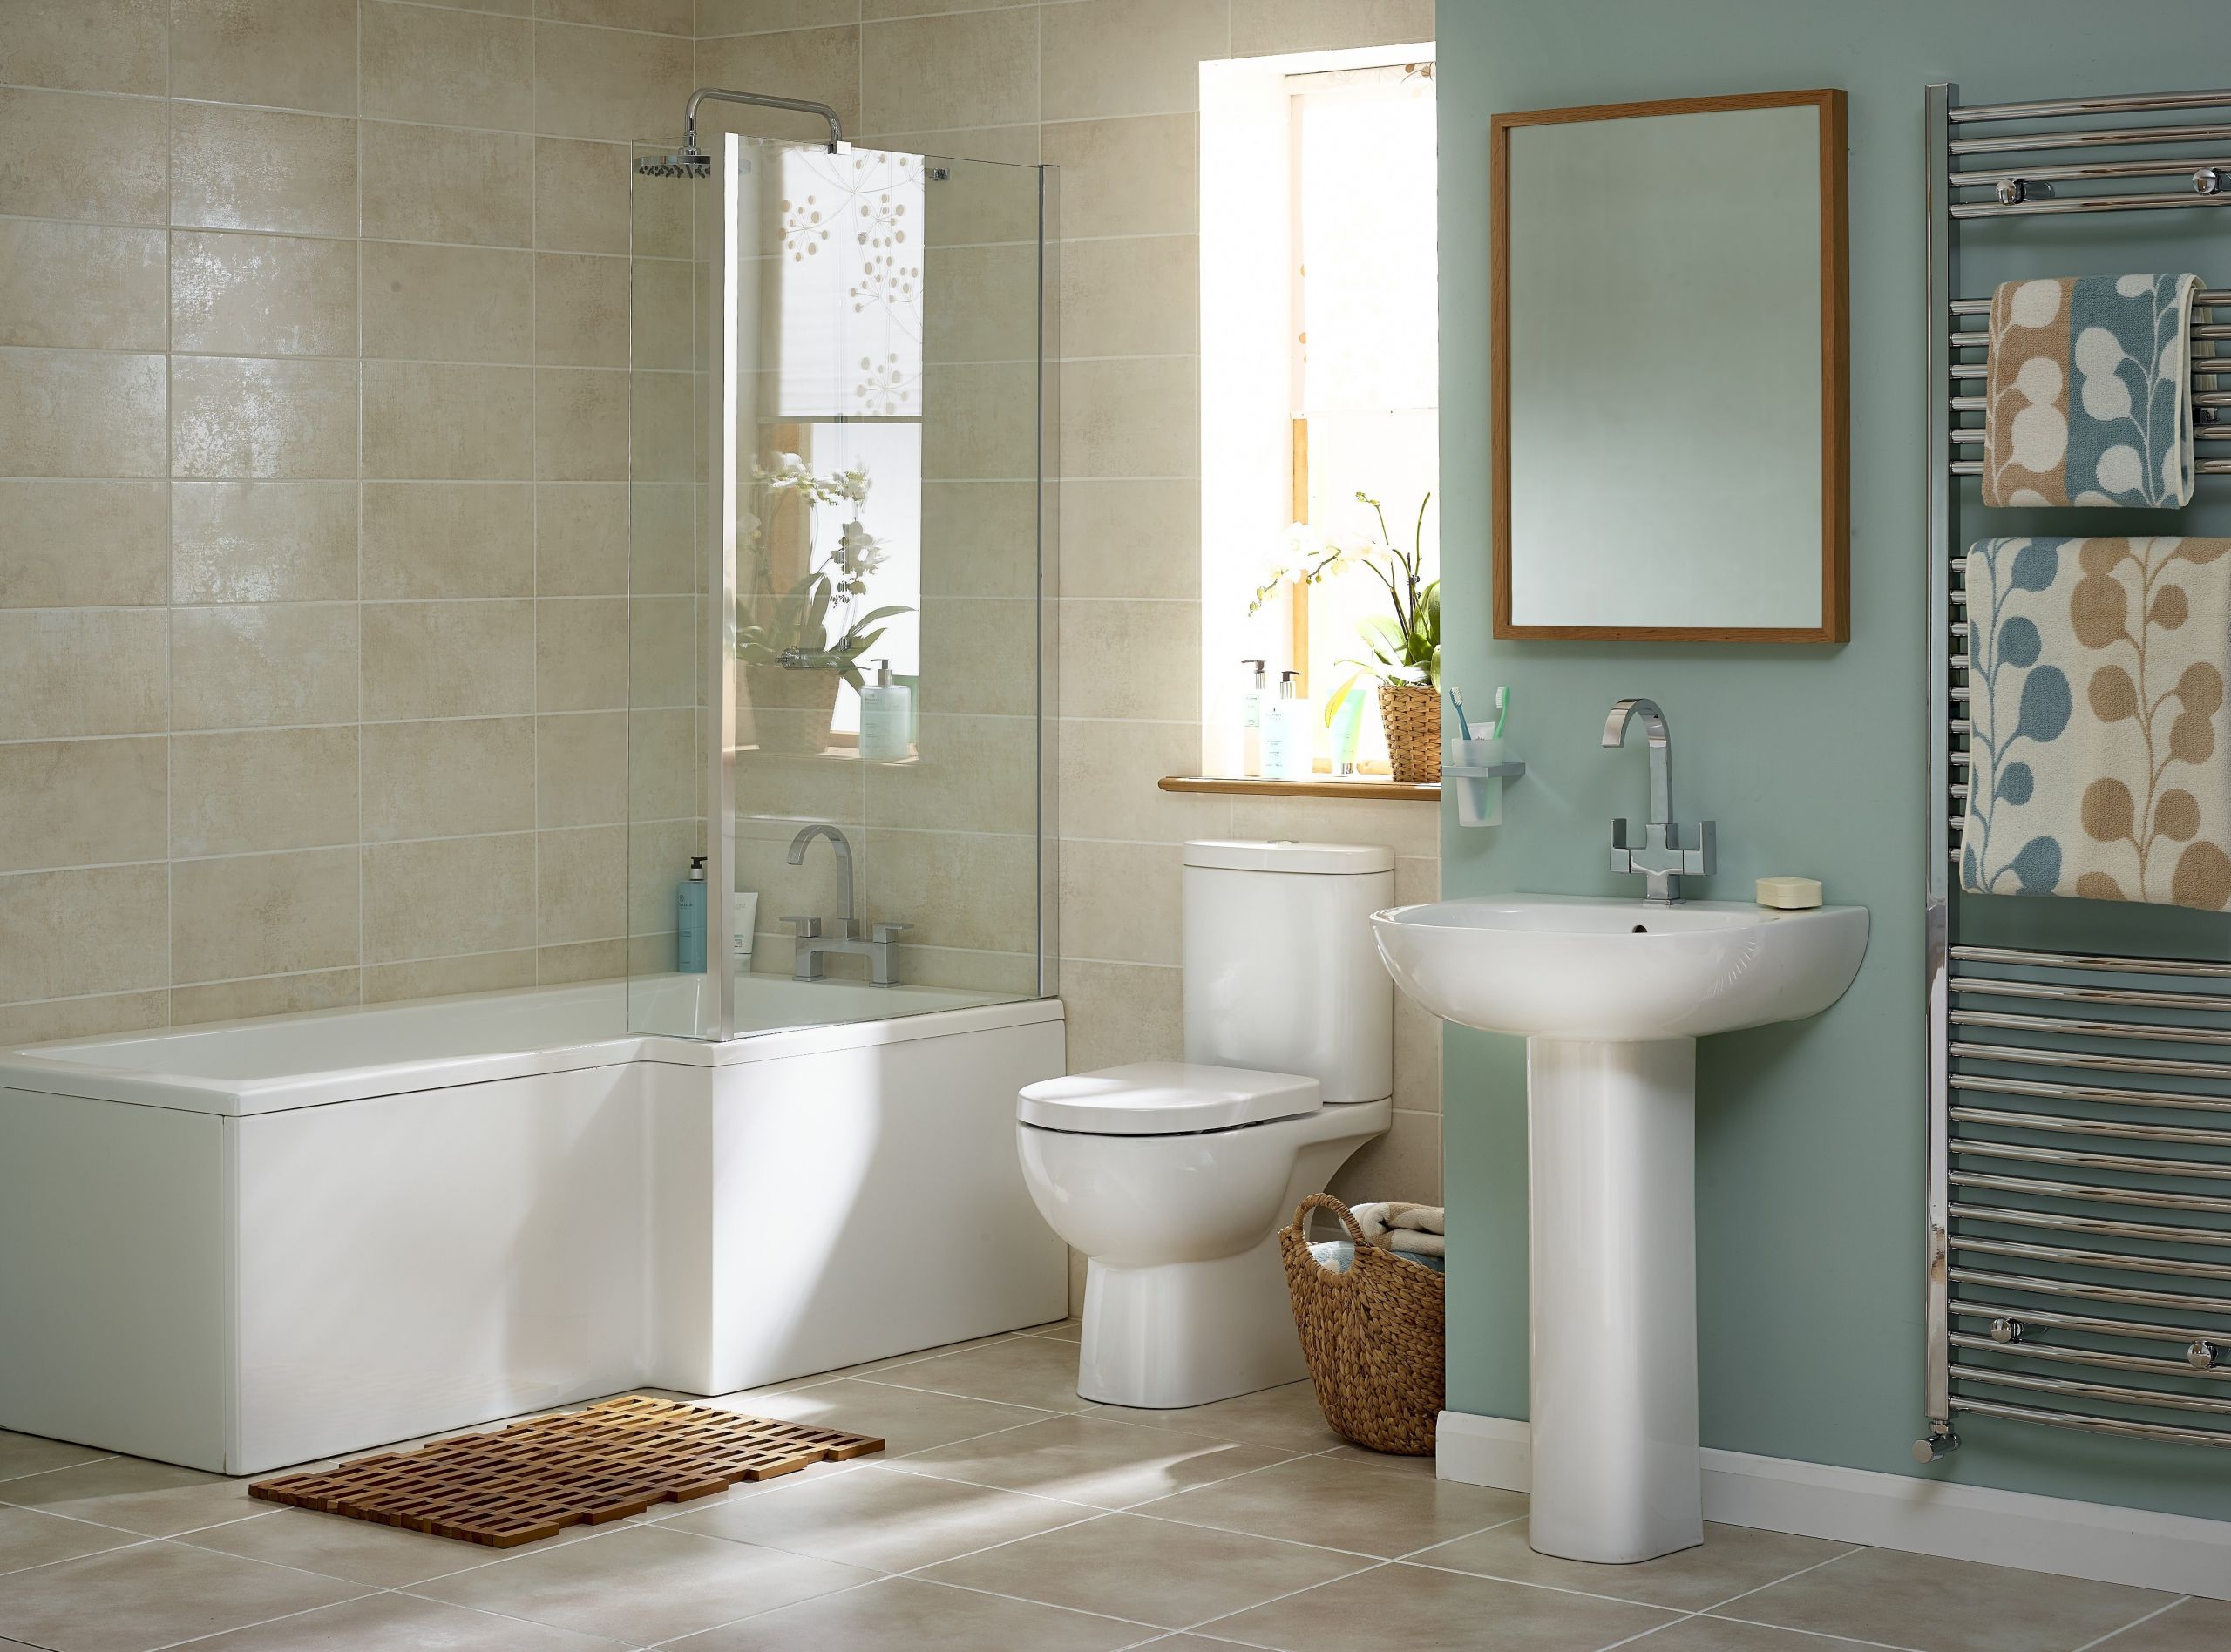 Bathroom Tiles Pictures
 Eastbourne Bathrooms & Tiles Home For All Your Bathroom